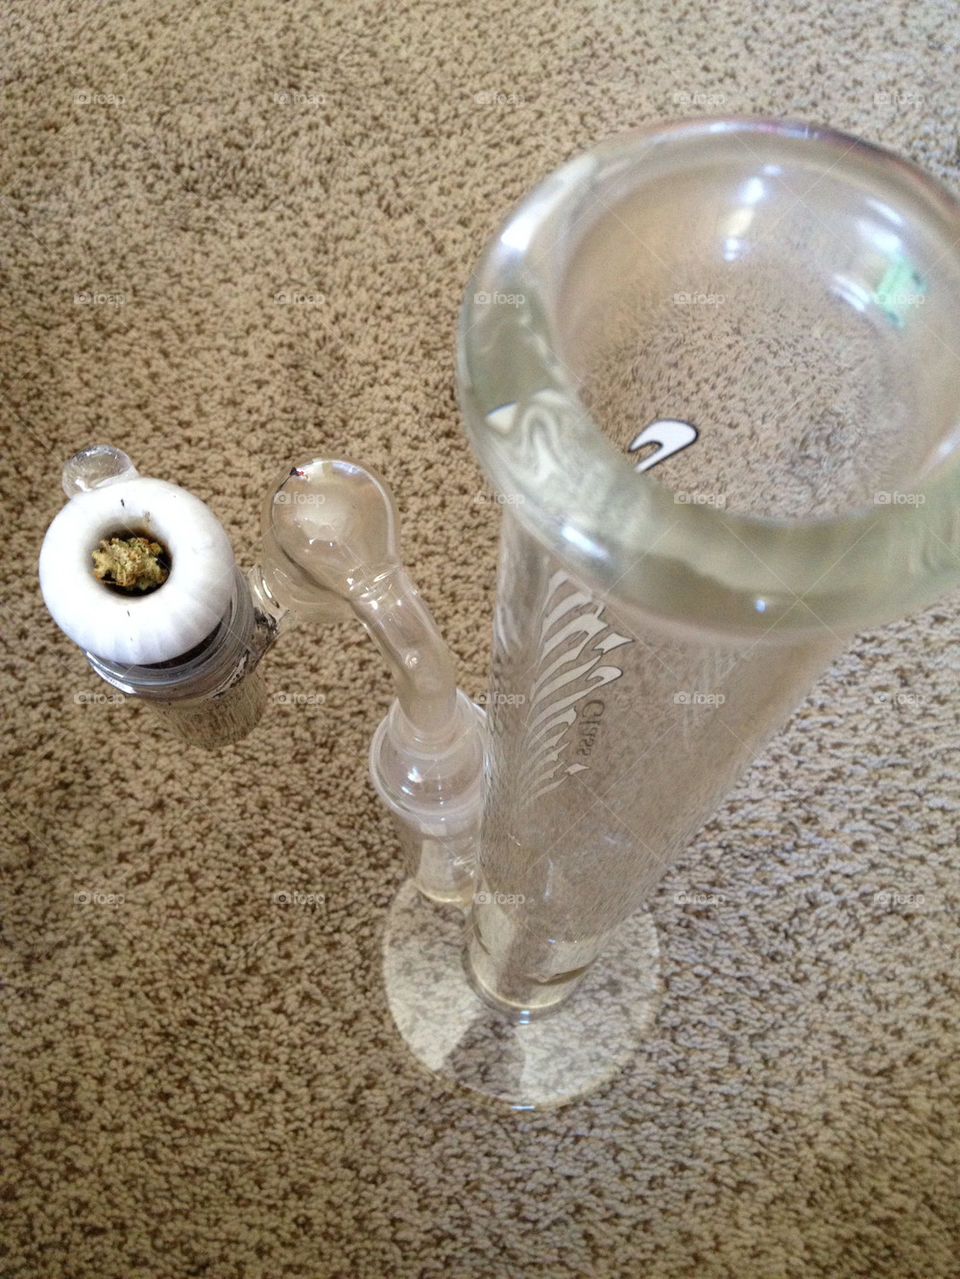 weed glass illusions bong by kayleighsherri